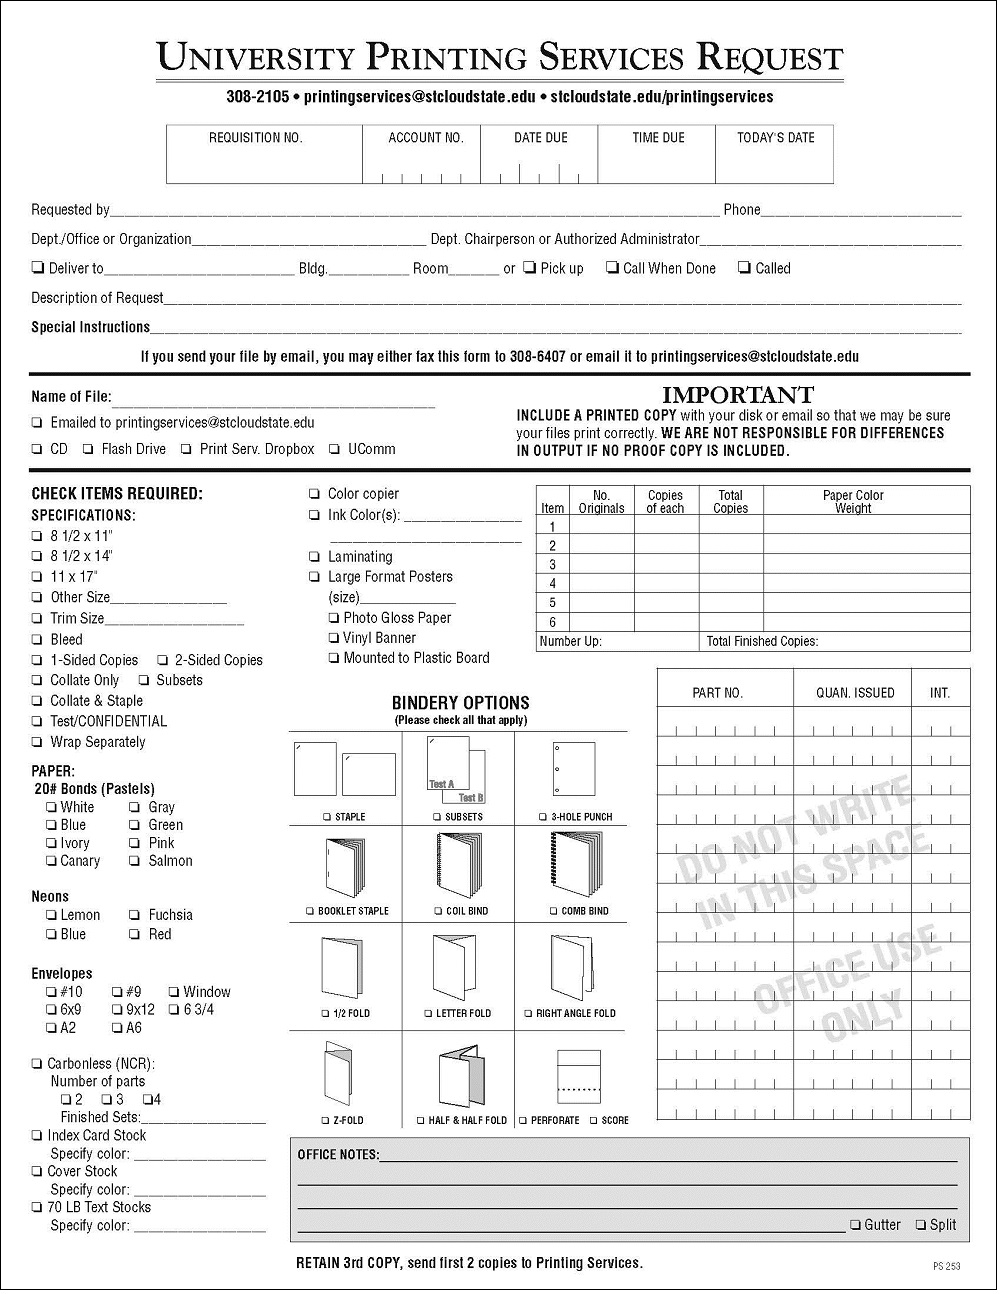 Printing Request form